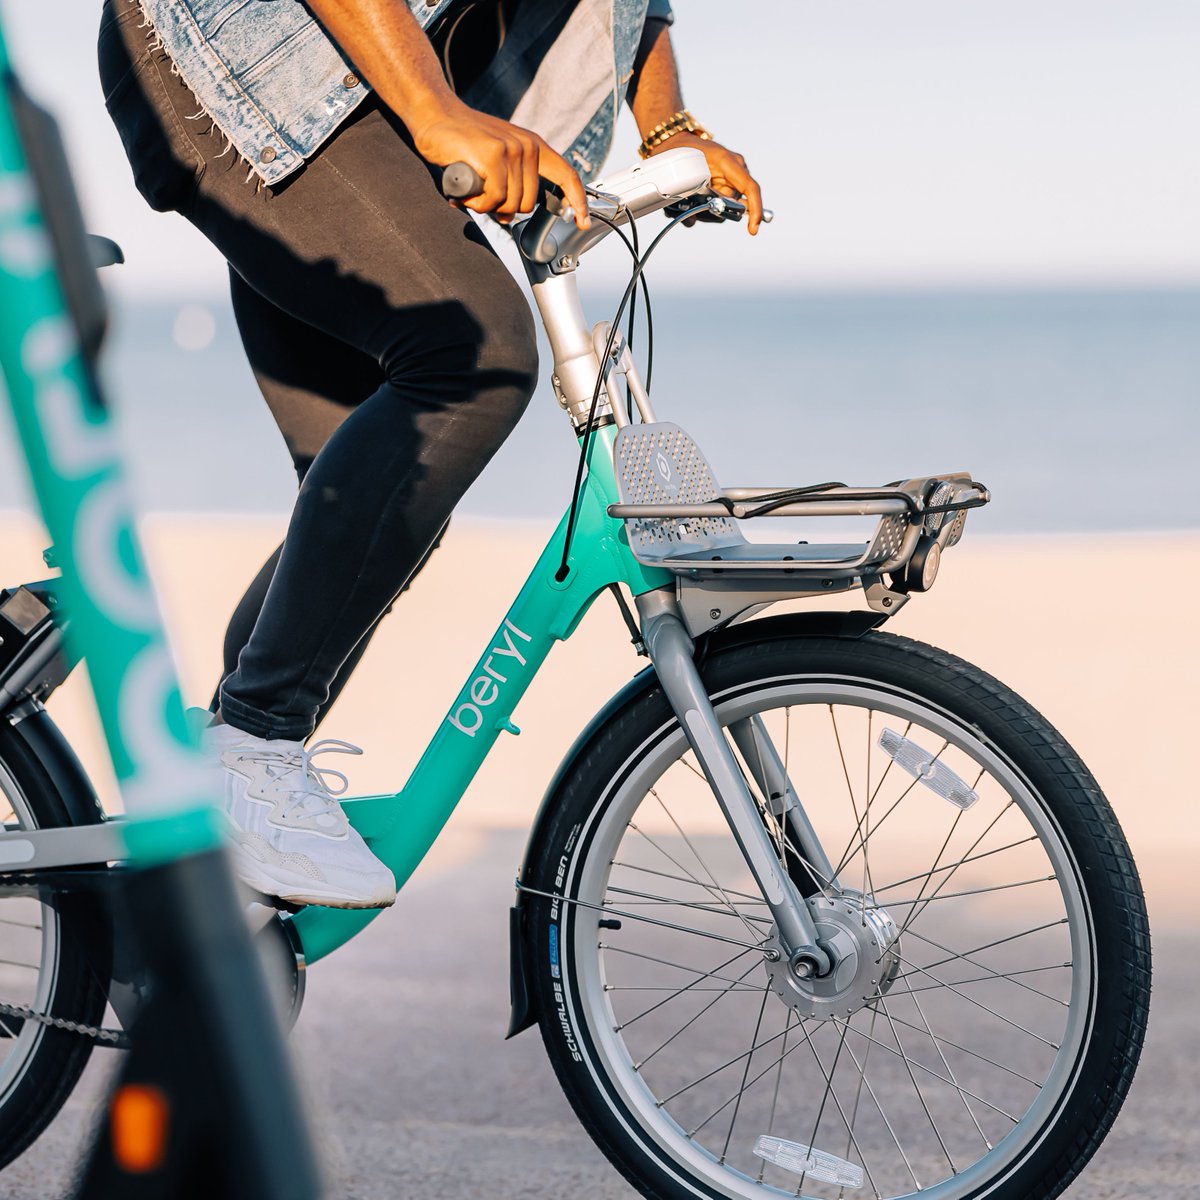 This long weekend don't bank on staying indoors! 🌞 Get riding with Beryl and enjoy: ✅ Easy to use app 🌳 Zero emissions 🚲 Flexible transport Our bikes and e-scooters are a safe investment for your days off. 🌇✨ Download the Beryl app now: beryl.app/CLx3QyIyRJb